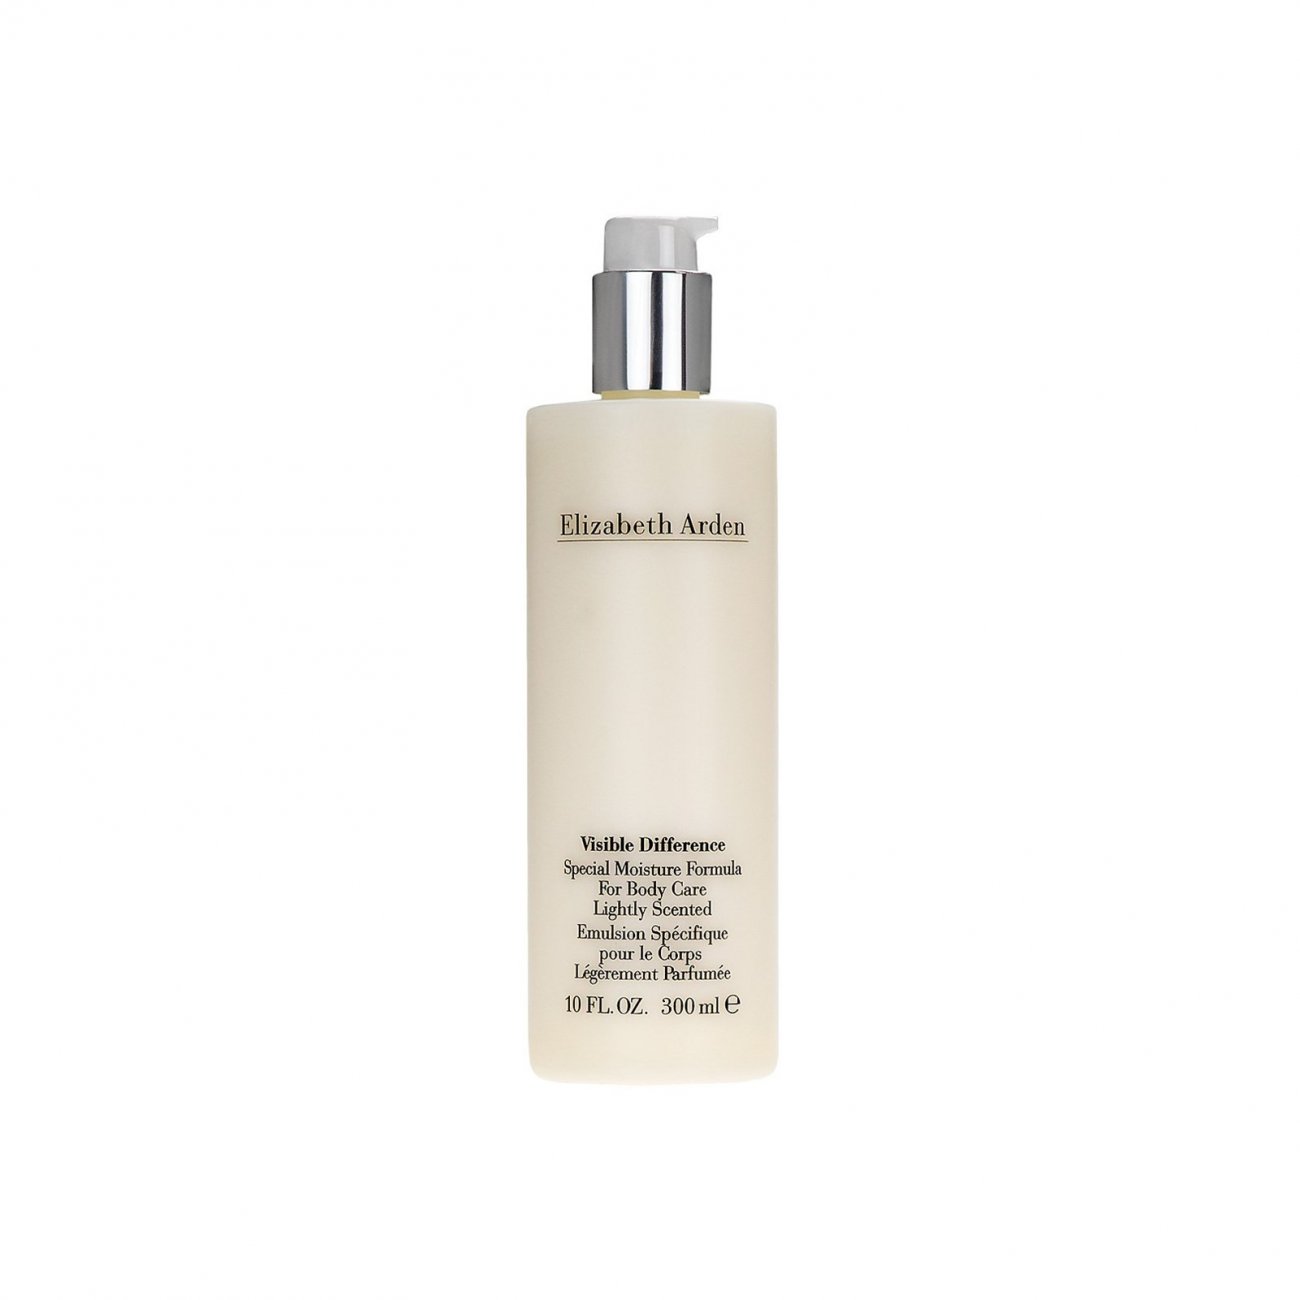 Buy Elizabeth Arden Visible Difference Special Moisture Formula Lotion 300ml (10 fl oz) · USA